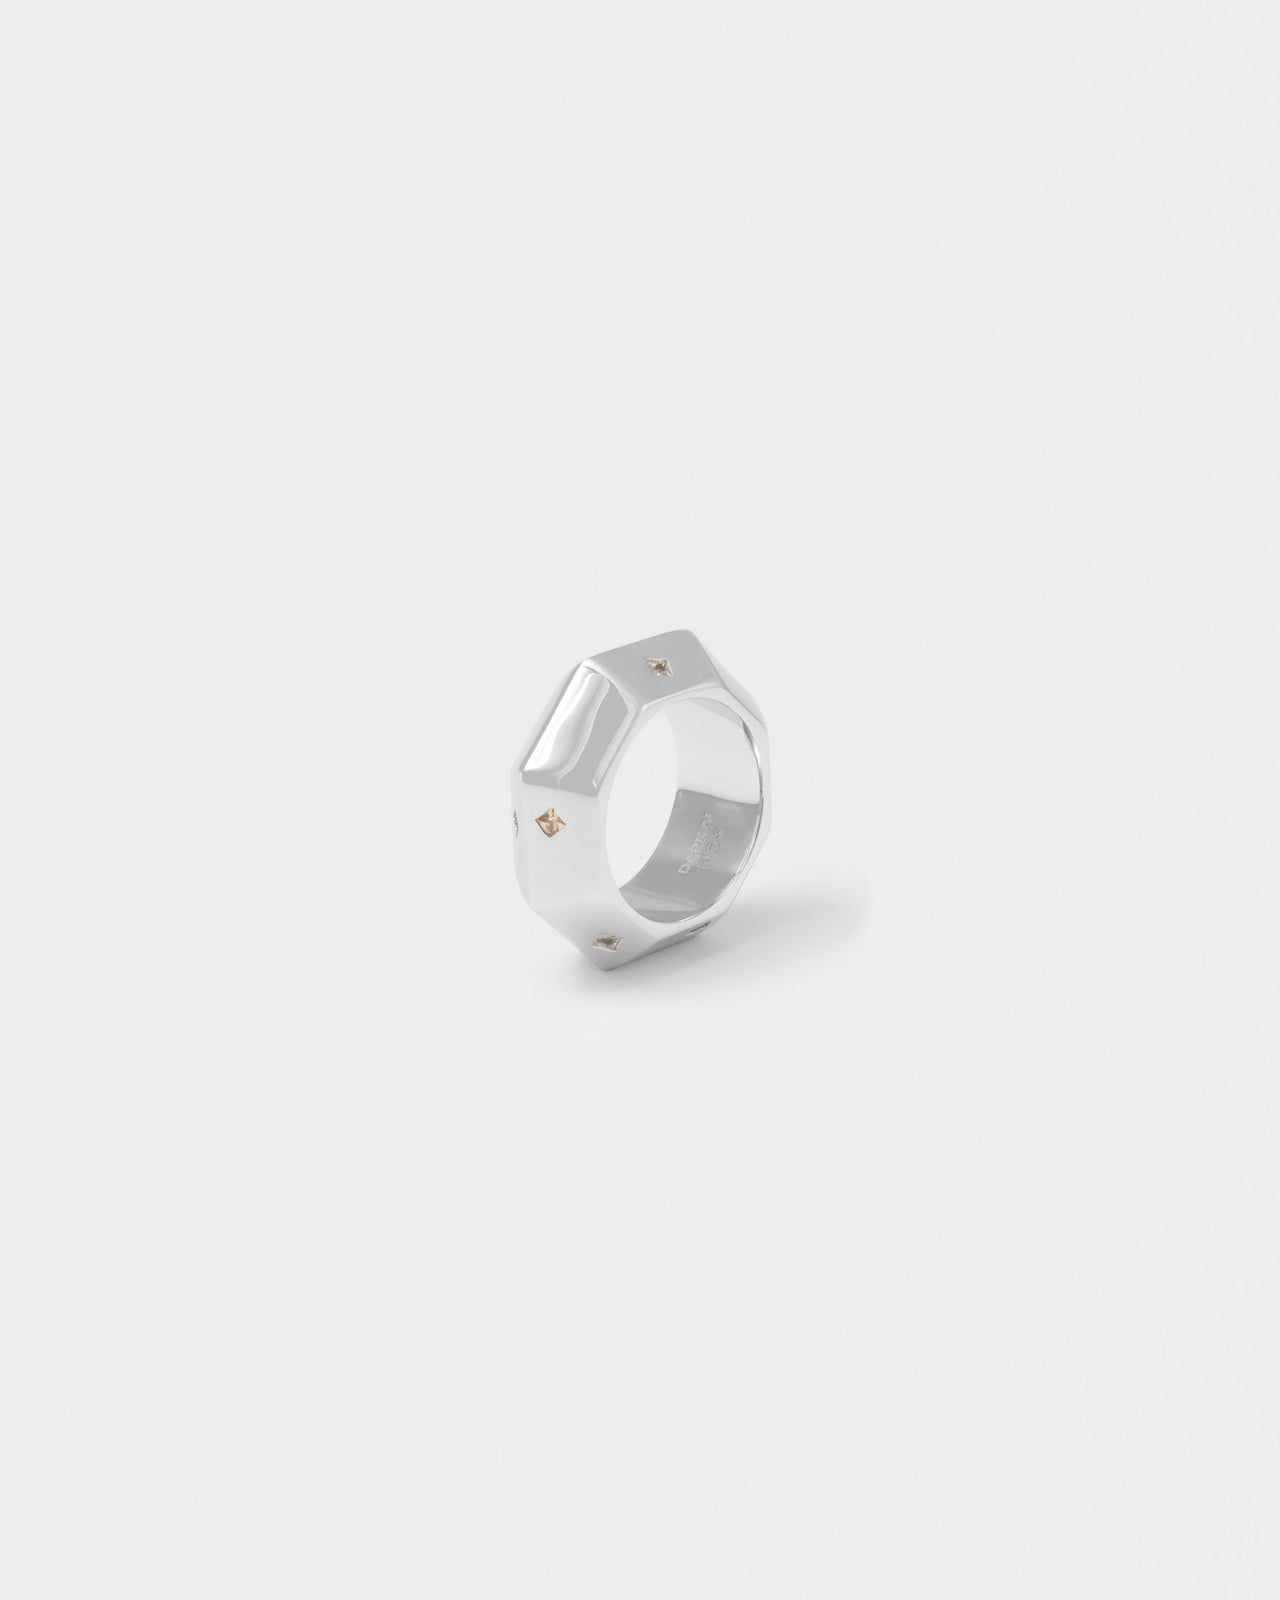 octagonal stainless steel white ring with stores